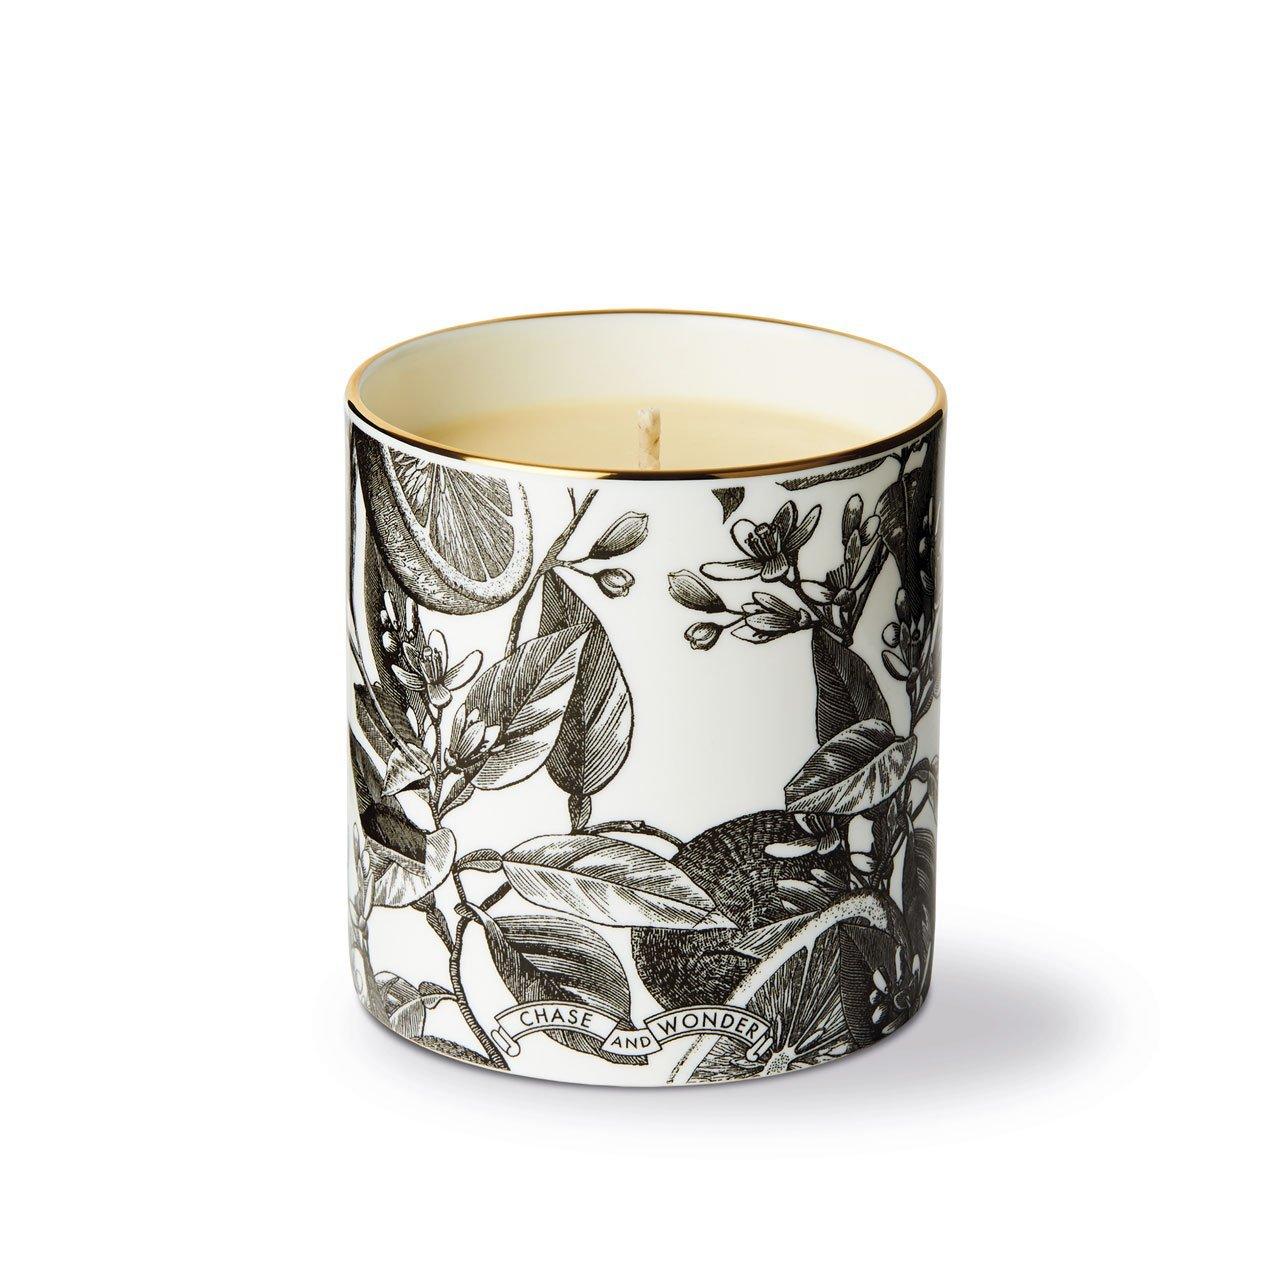 The Orangery Ceramic Candle - Chase and Wonder - Proudly Made in Britain